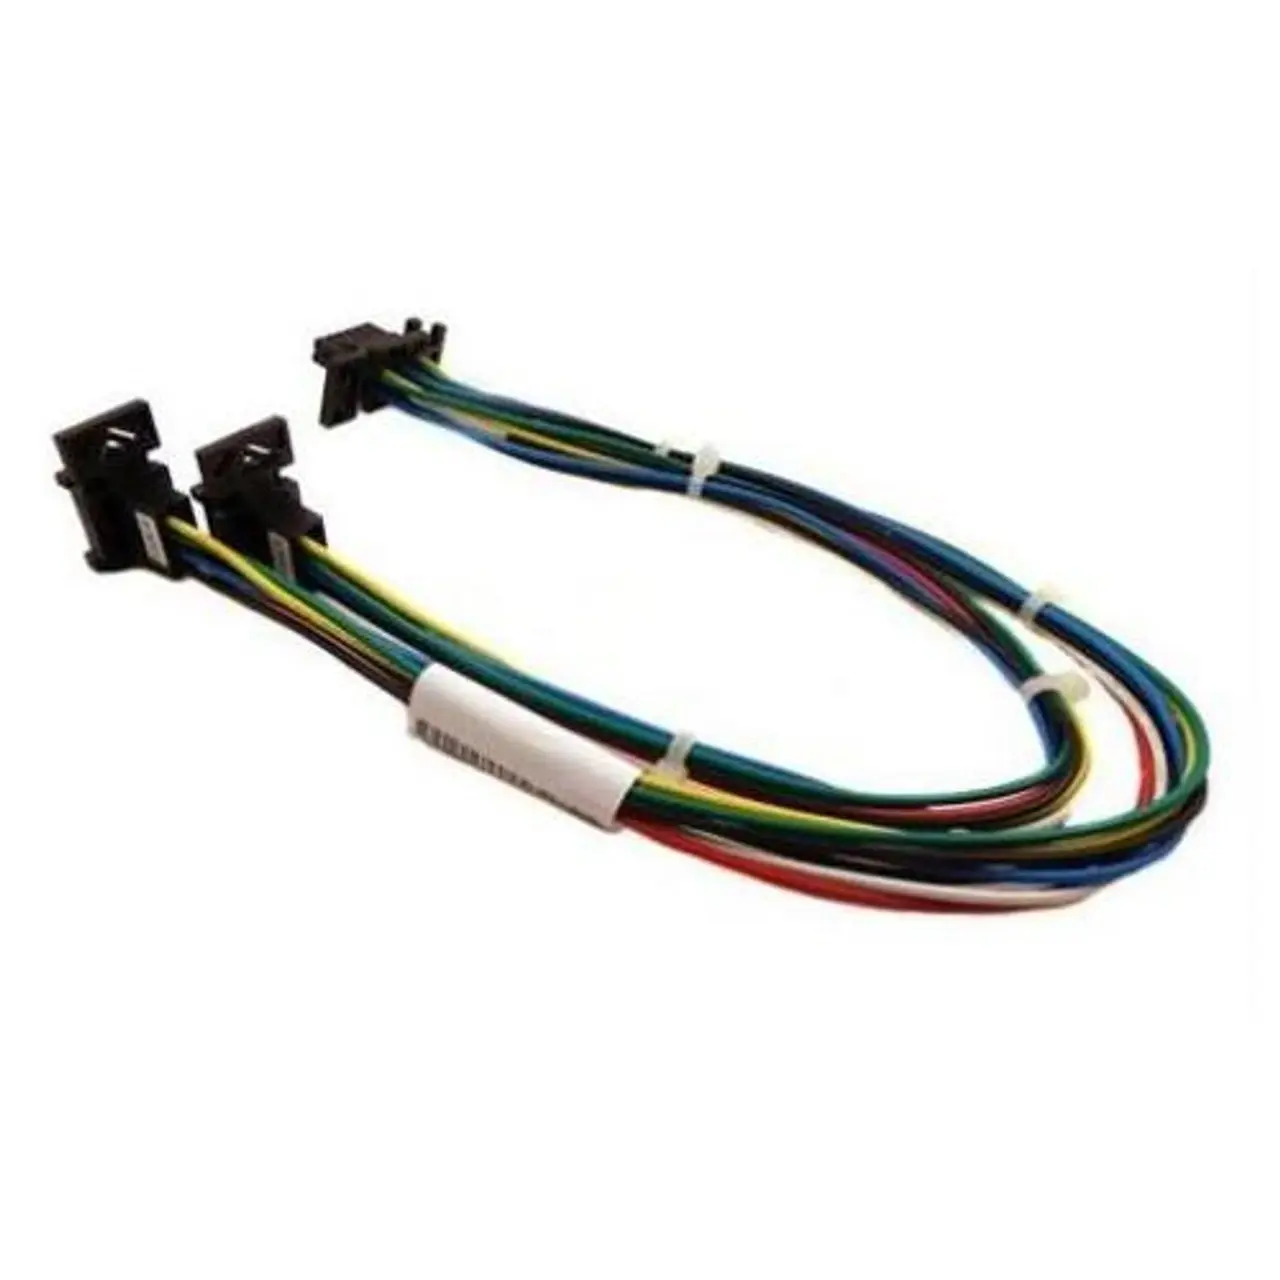 23R2519 IBM Tyco-GD PICO-D-P Internal Cable Assembly